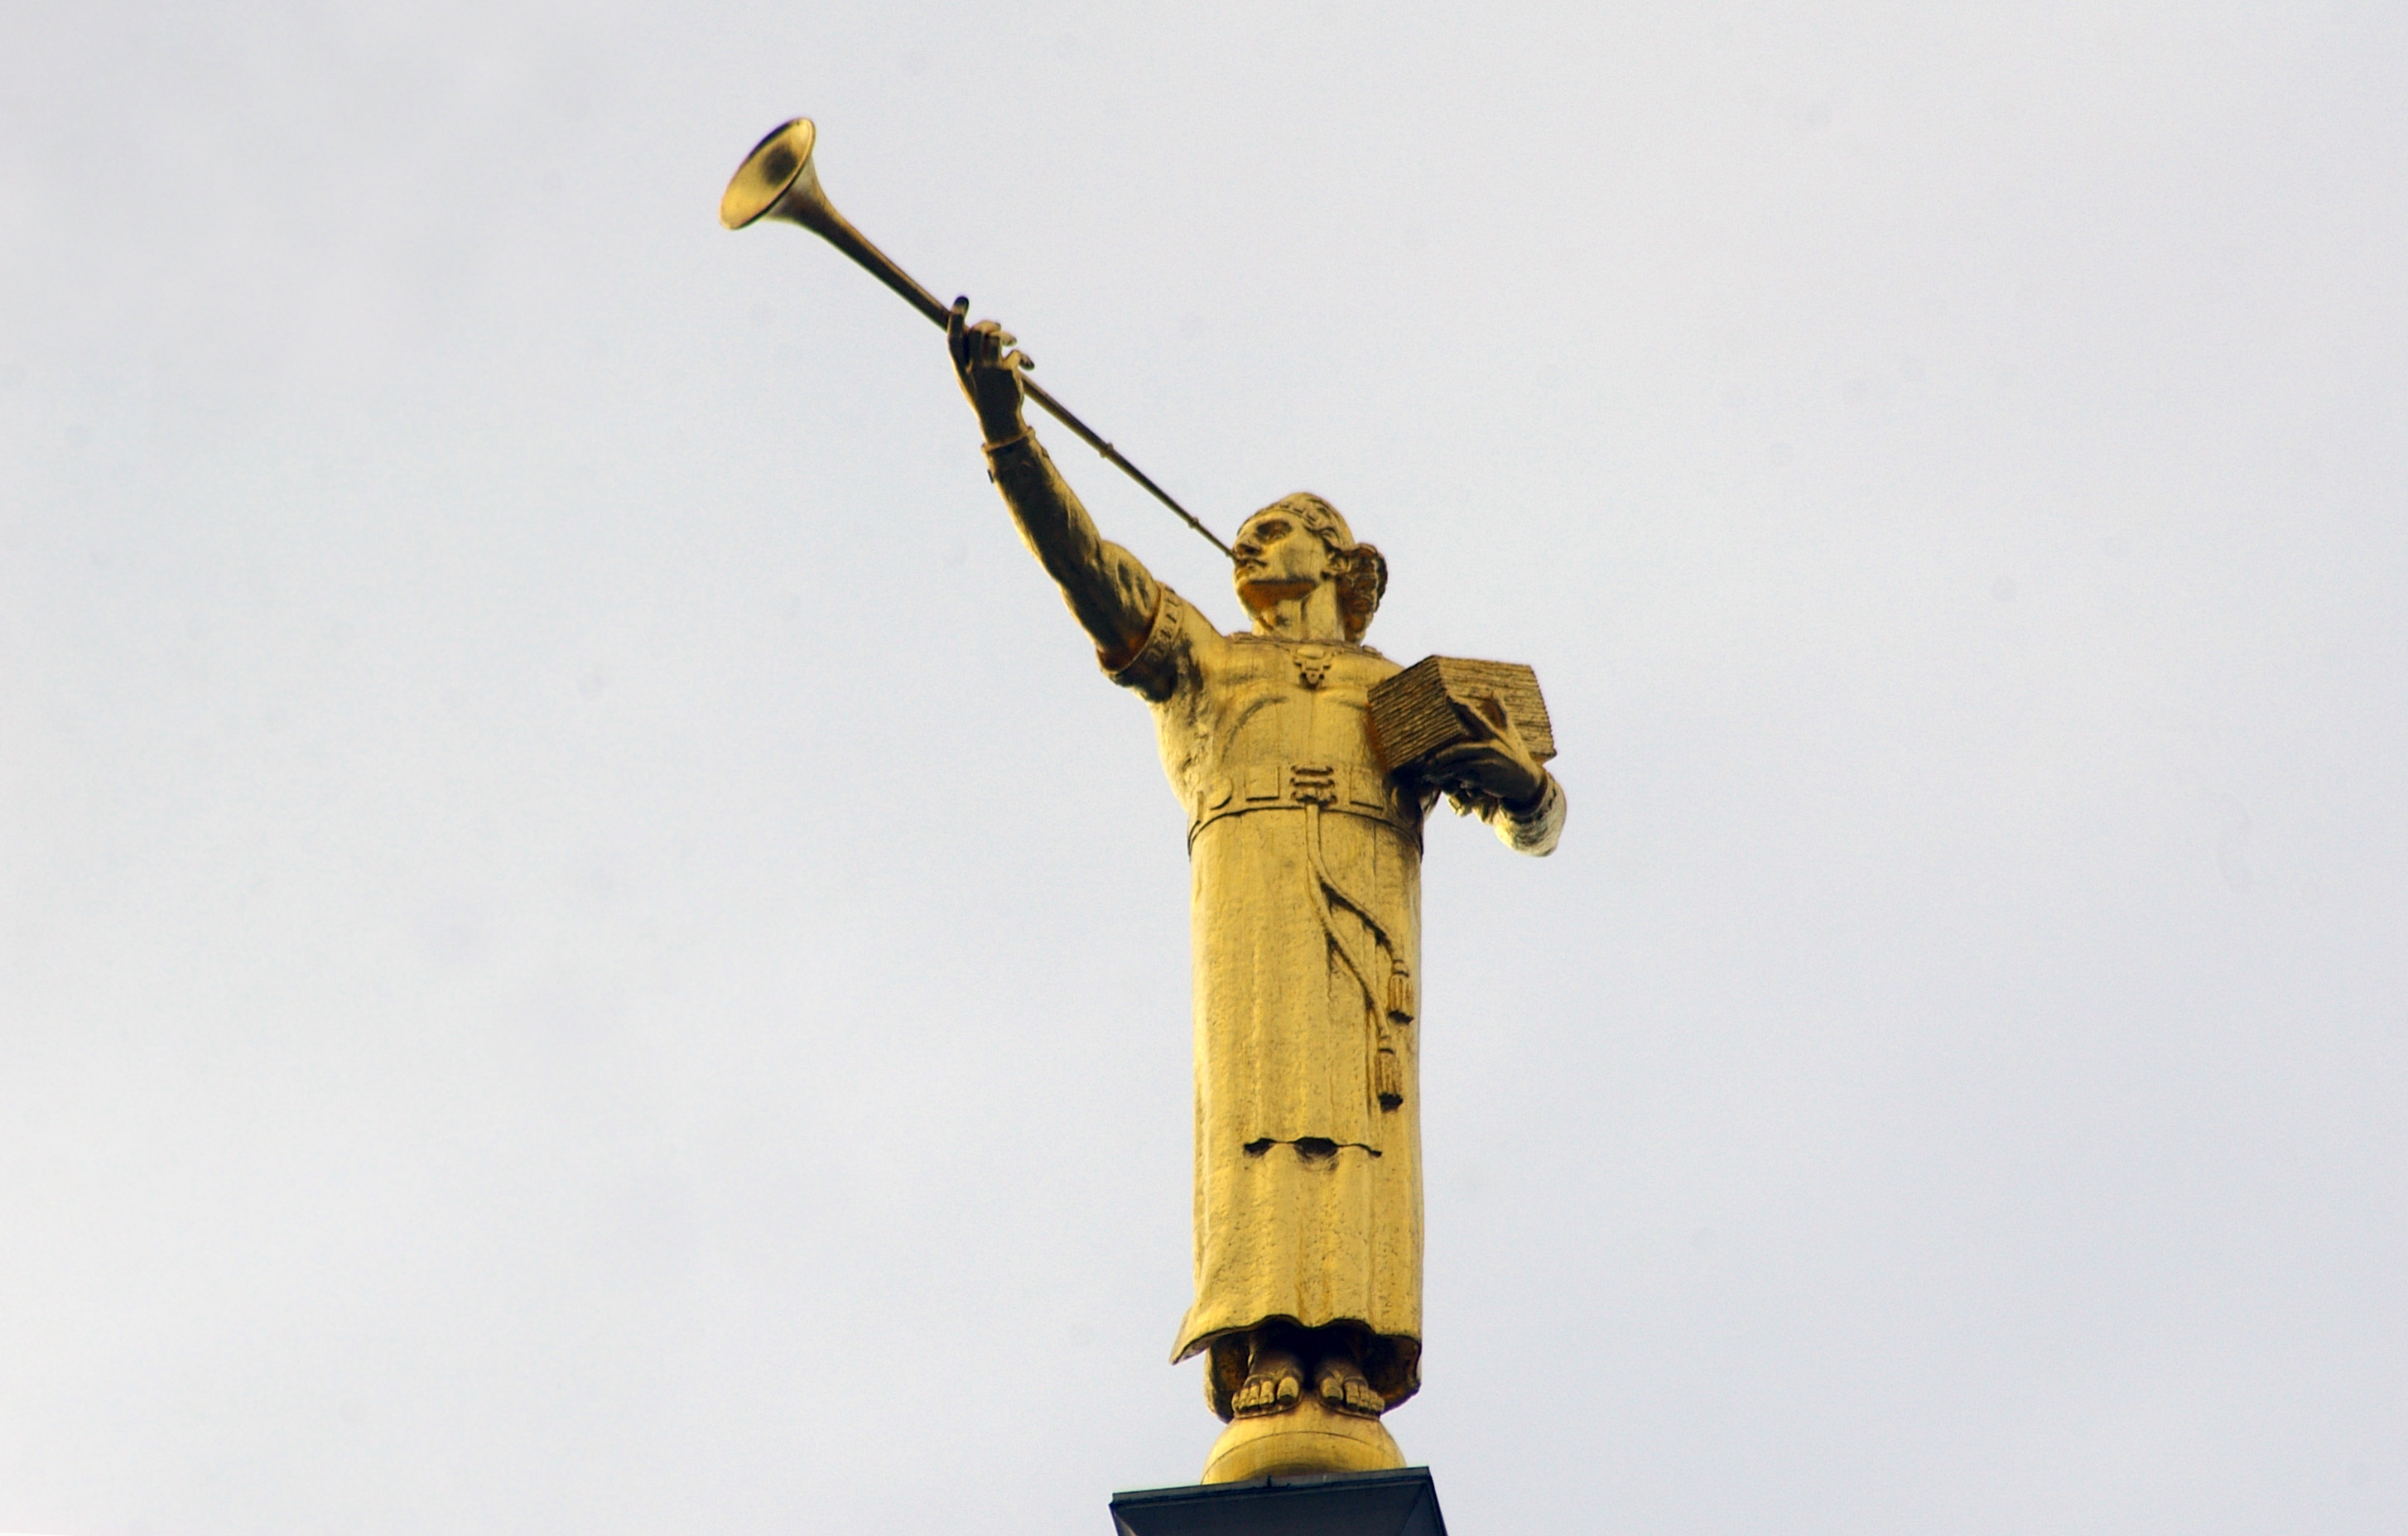 Angel Moroni heralds the return of the Lord